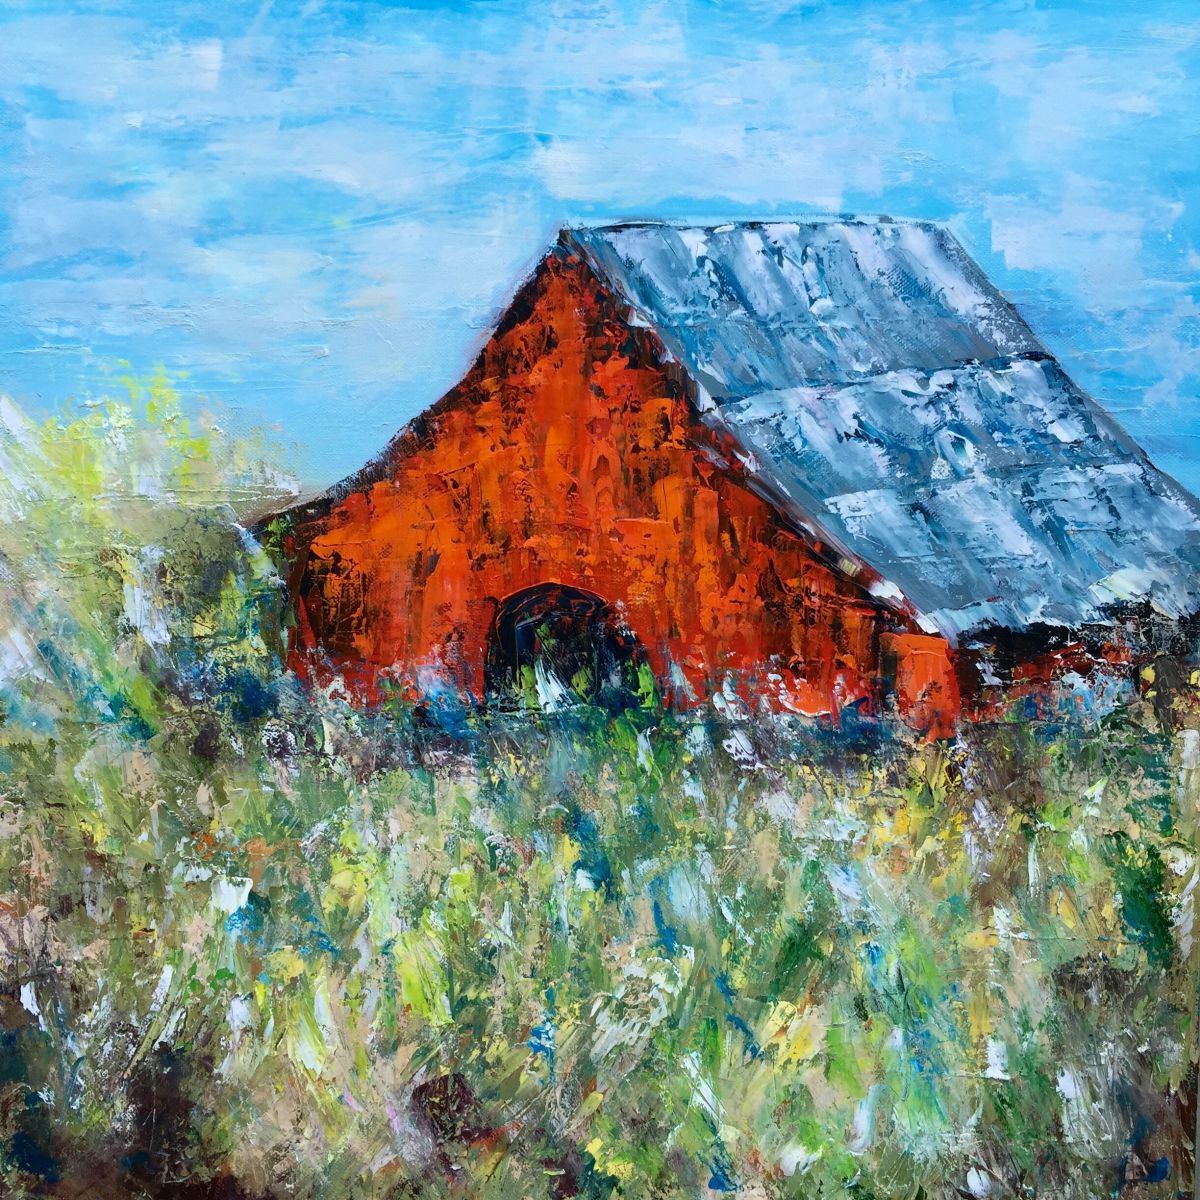 Old Red Barn 20x20 by Emma Bell